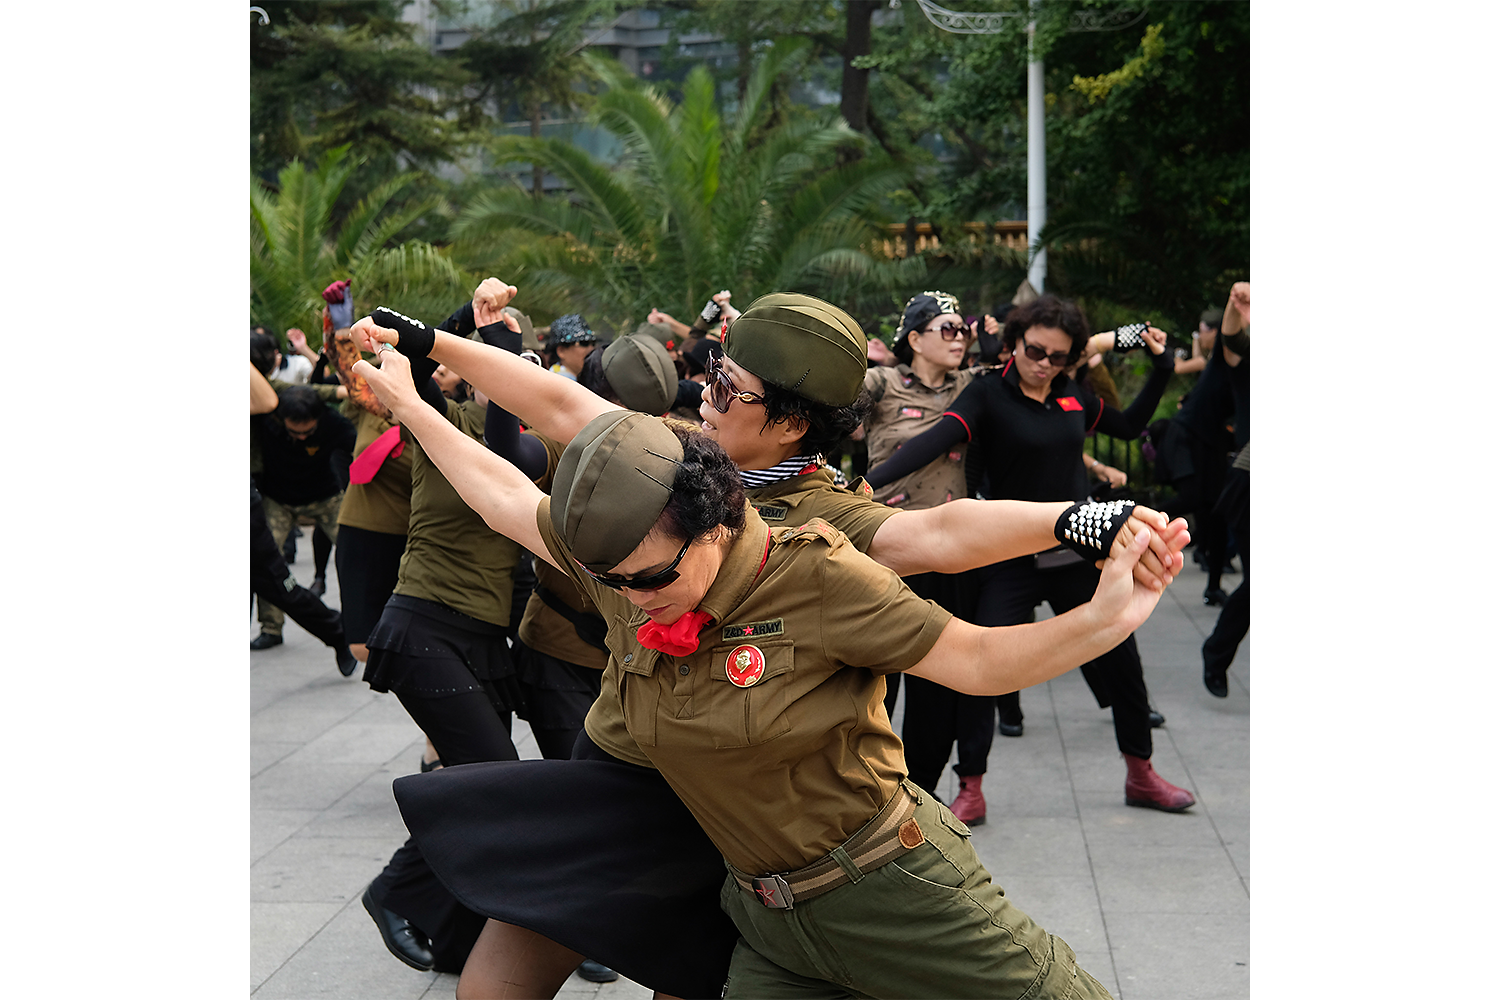 In Beijing’s Taoranting Park, a group dressed in Maoist costumes dances a version of the jitterbug. Photo by Liu Bowen @lbwsmail